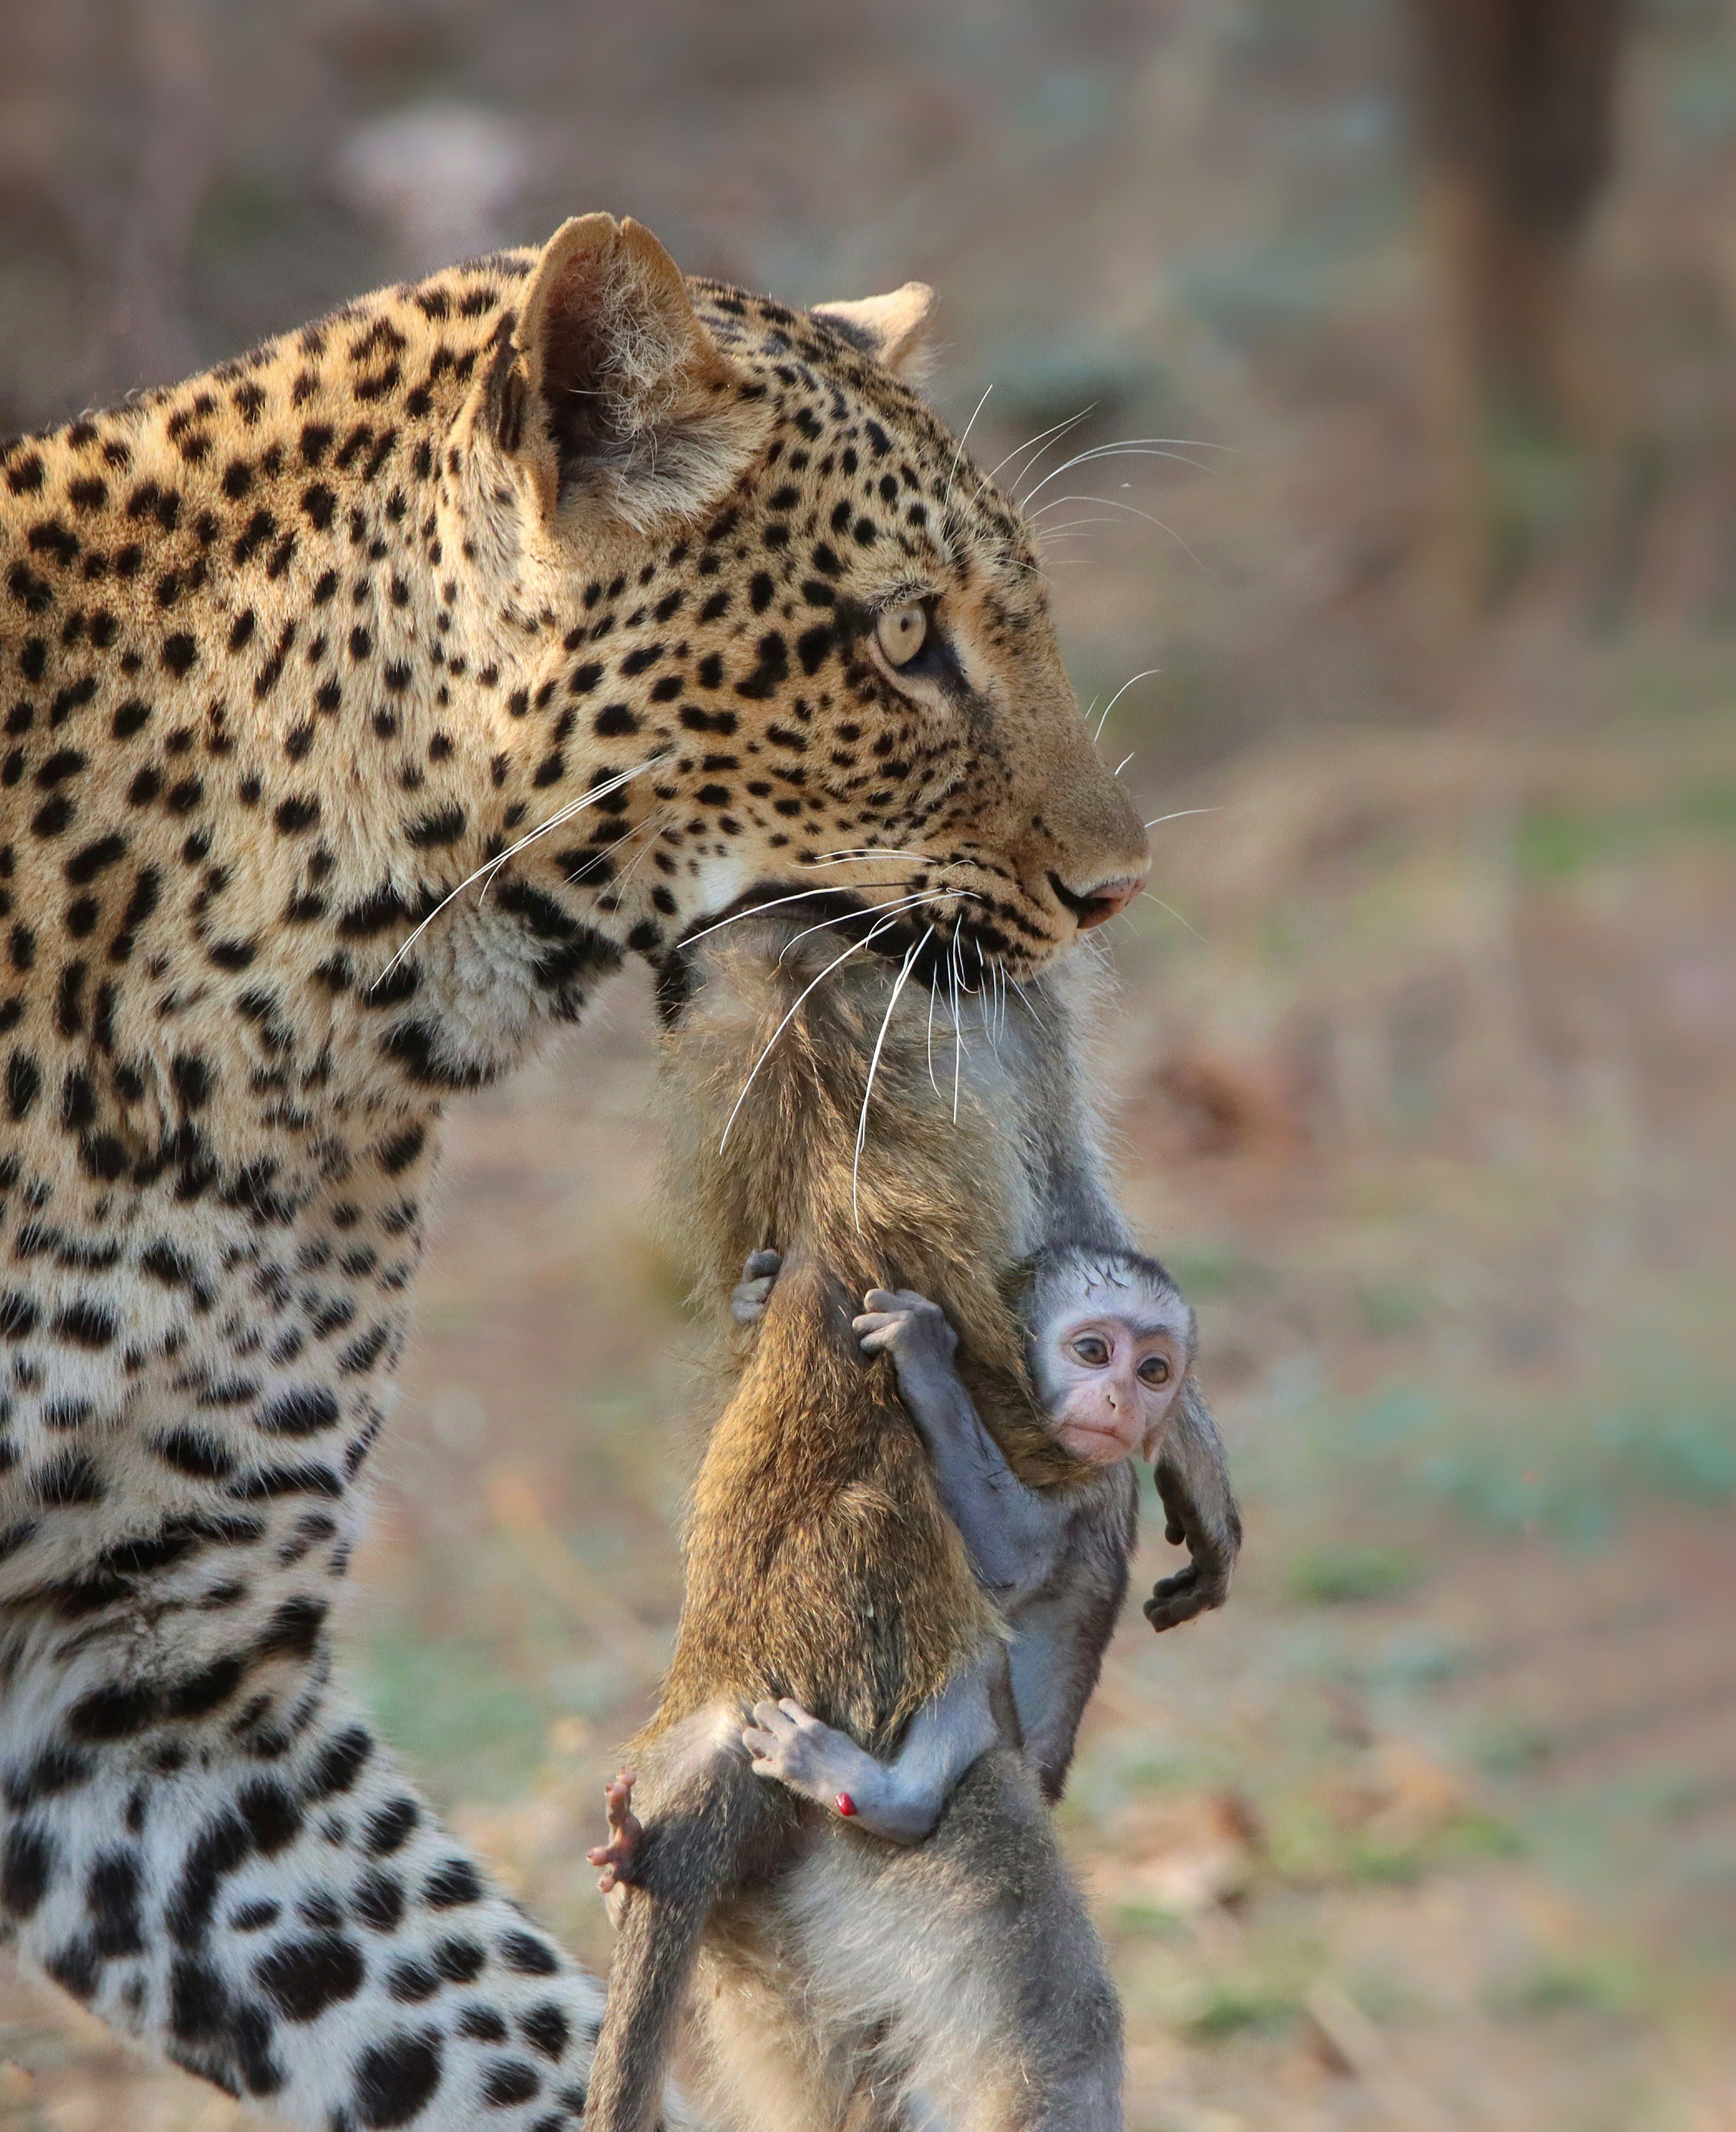 'An Unforgiving kingdom'. A leopard known as Olimba carries the carcass of a female vervet monkey with its baby still hanging on for dear life. Picture taken in South luangwa national park in Zambia. © Shafeeq Mulla/TNC Photo Contest